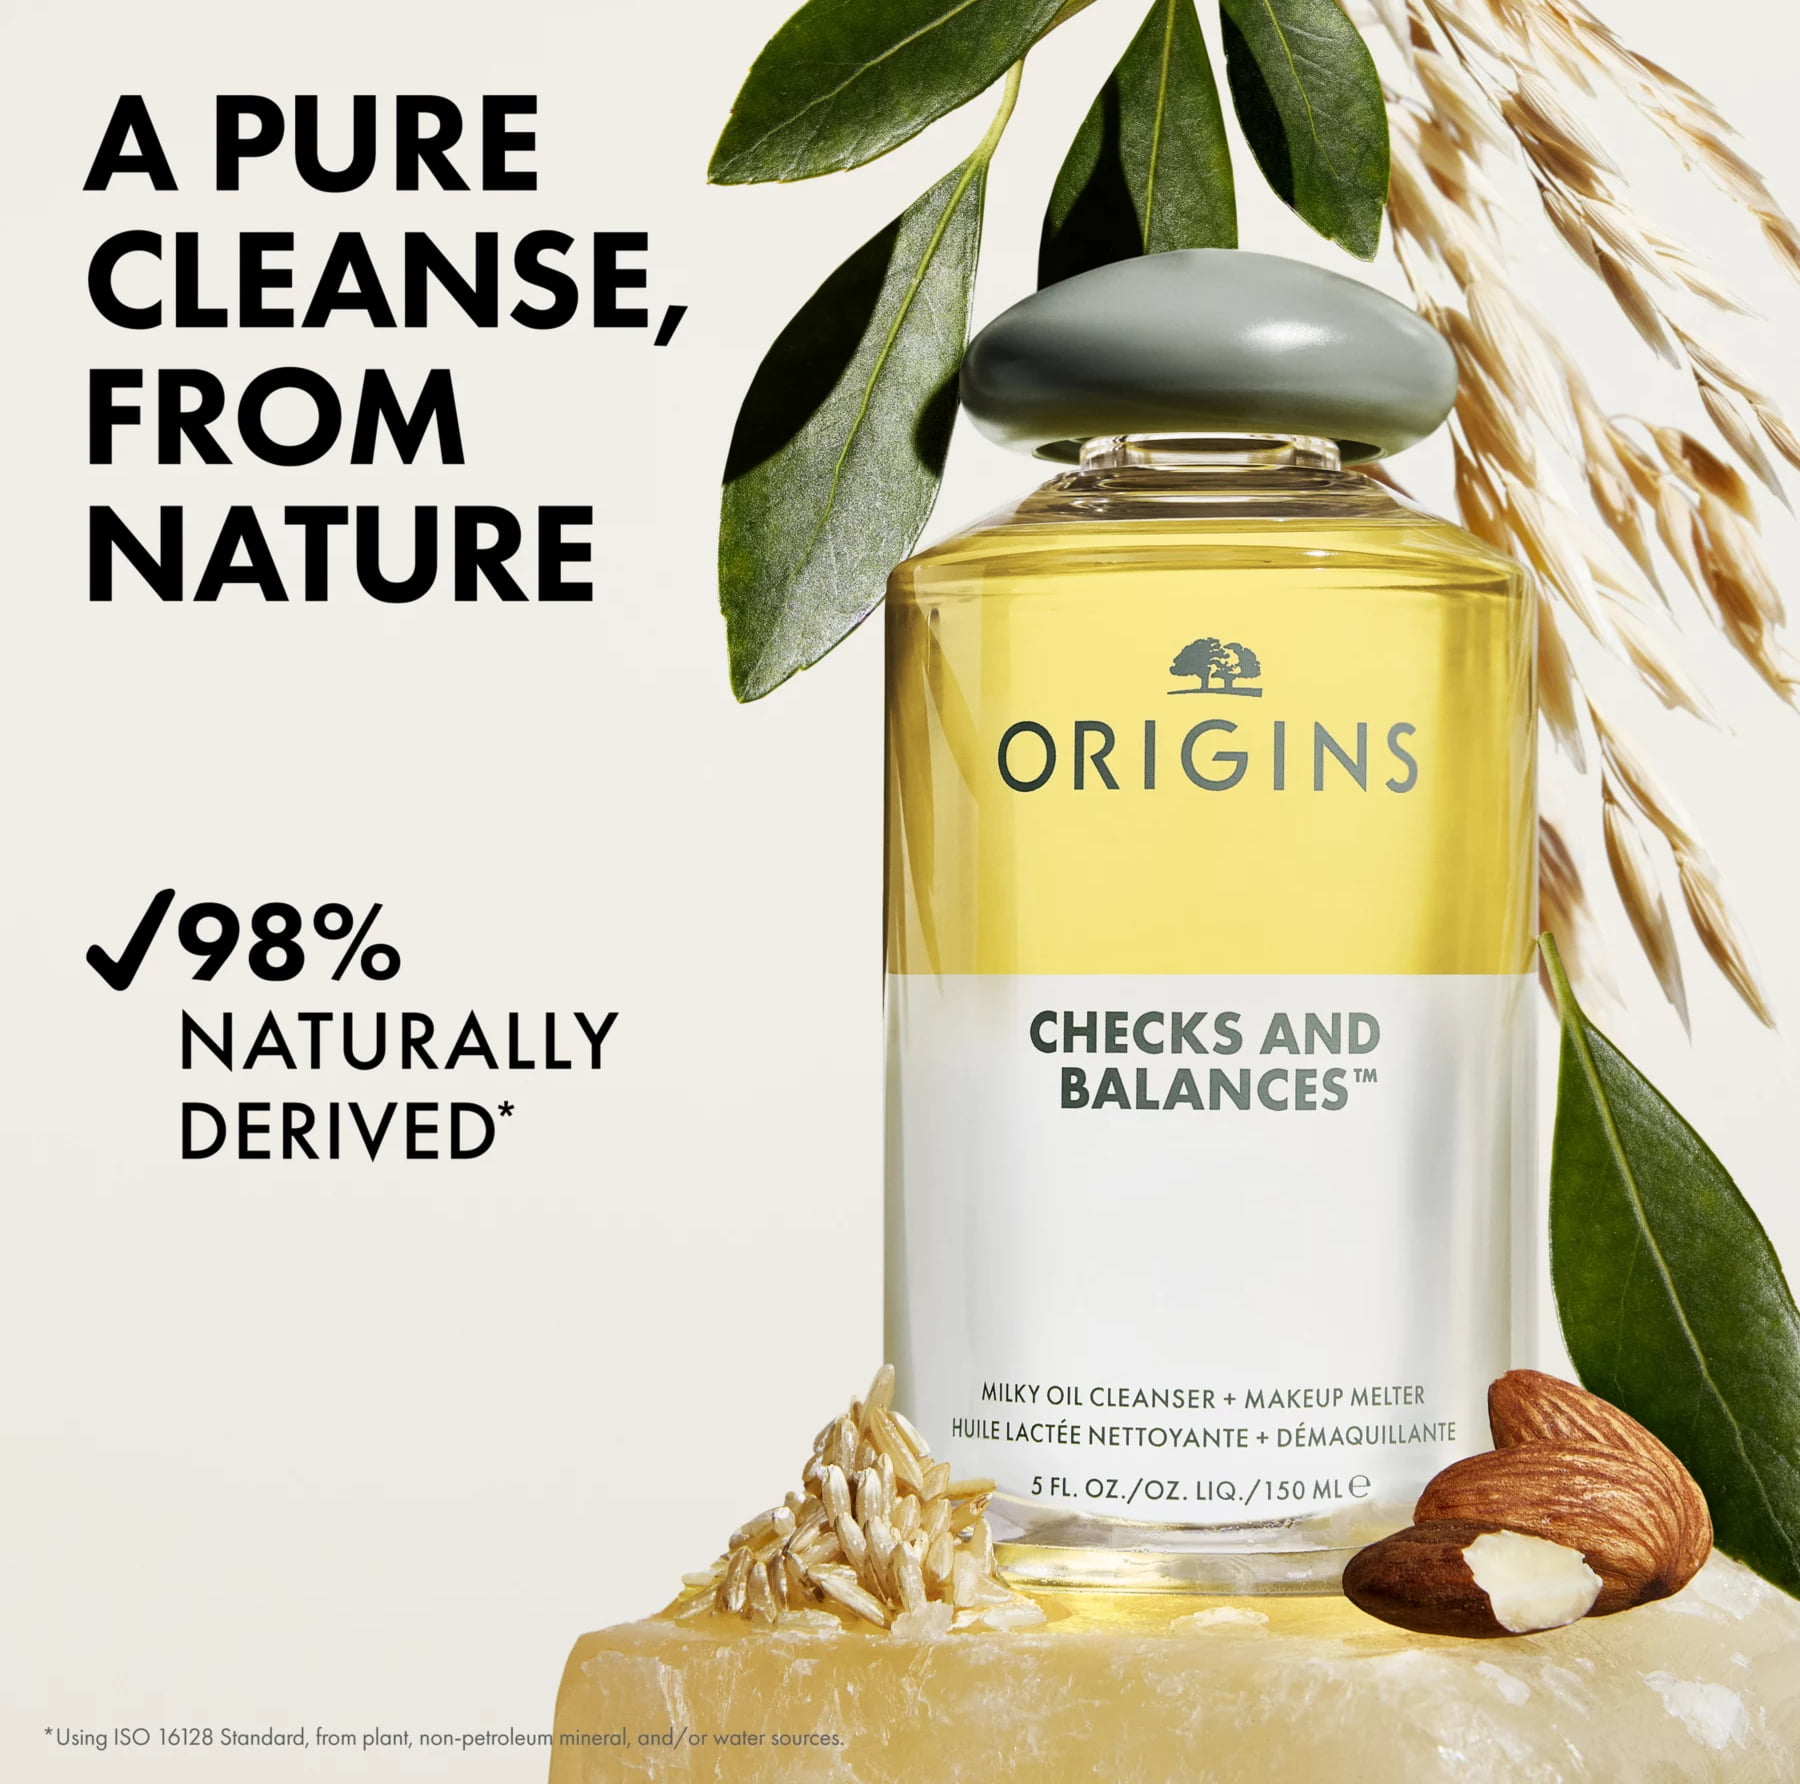 Origins Checks And Balance Milk to Oil Cleanser & Makeup Melter